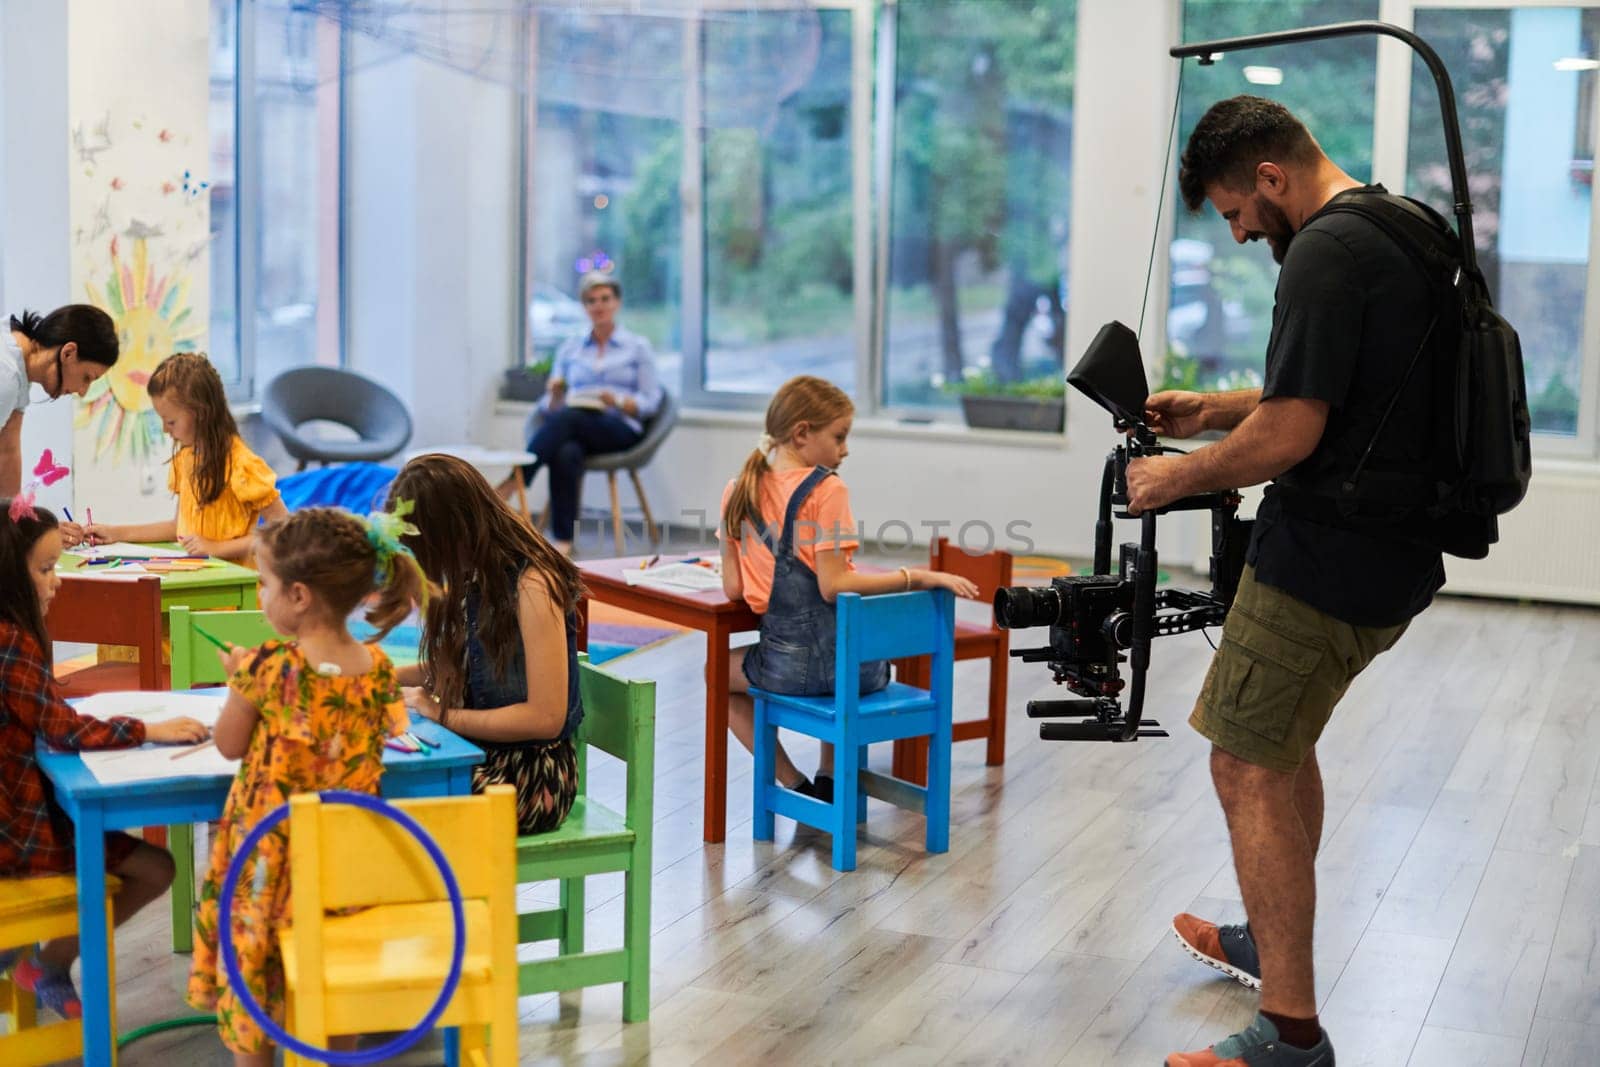 Cameraman films the joyful play and creative exploration of children at a preschool. High quality photo